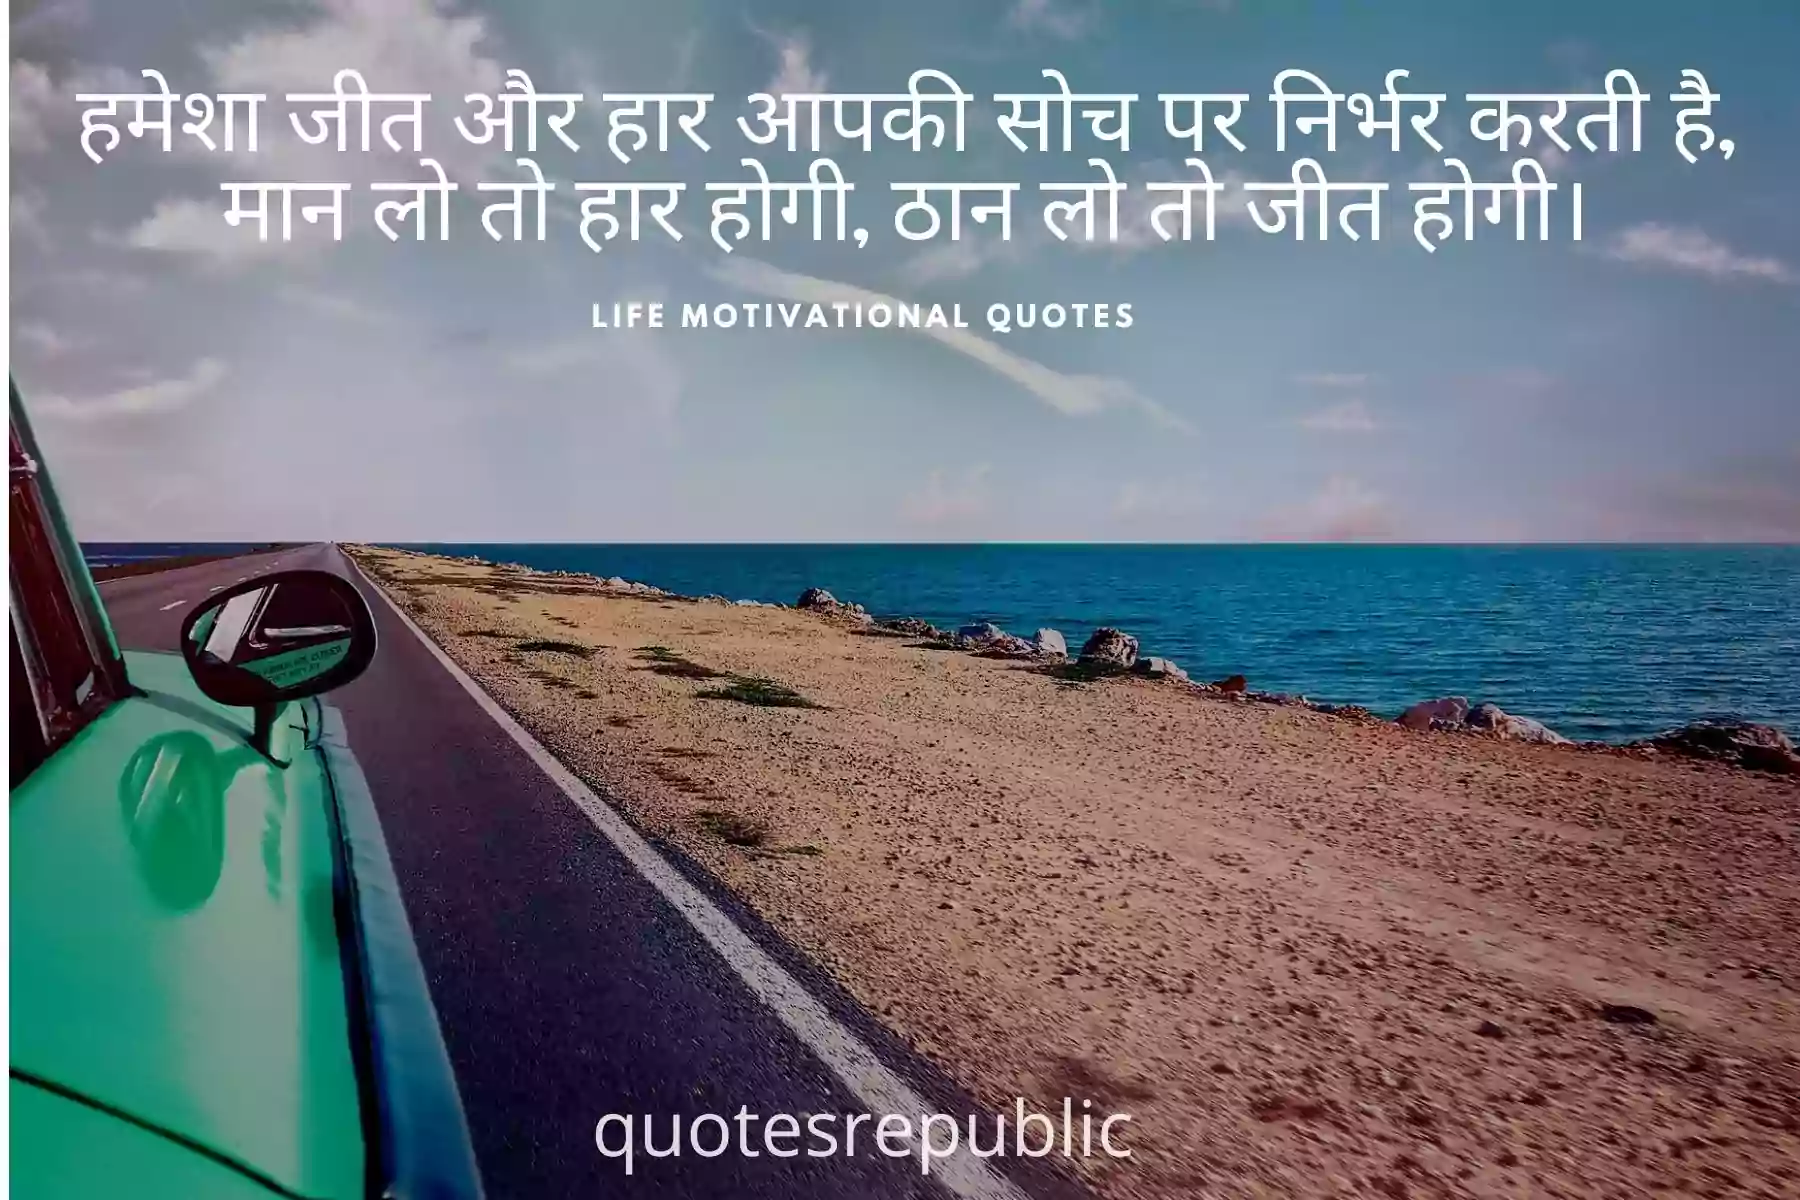 Motivational Quotes For Life In Hindi